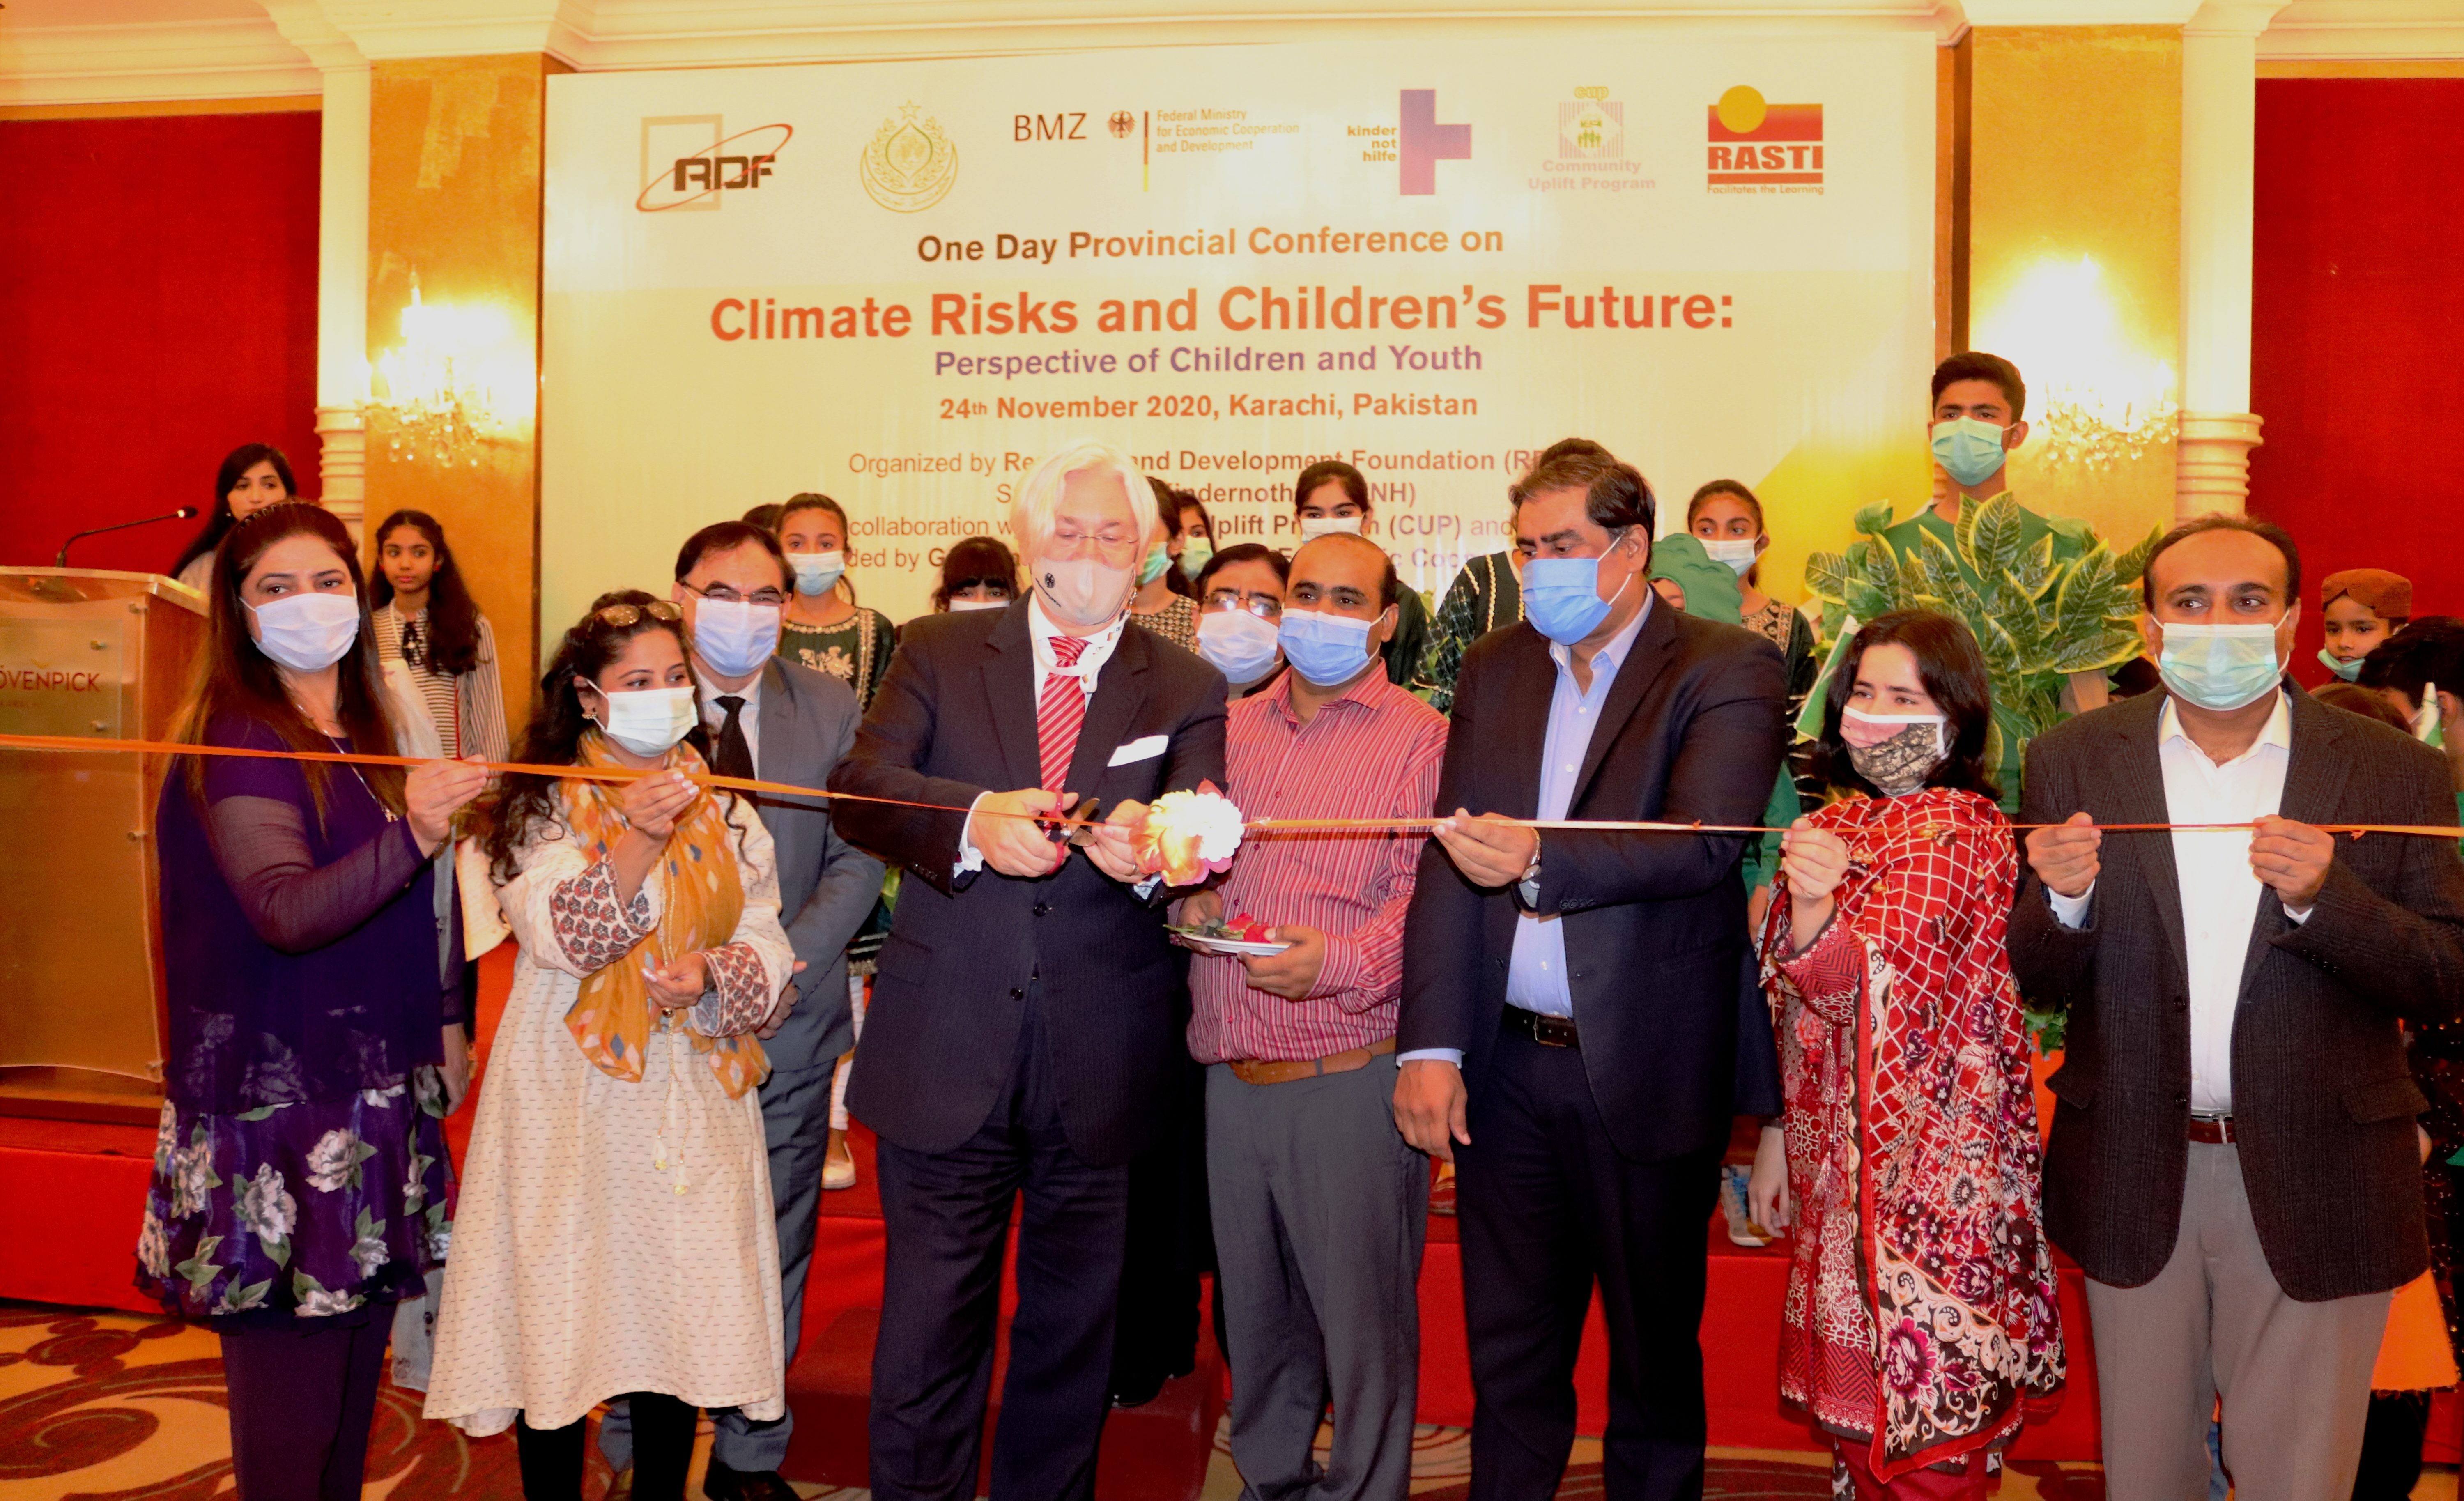 One Day Provincial Conference on Climate Risks and Children’s Future, in Karachi, Sindh